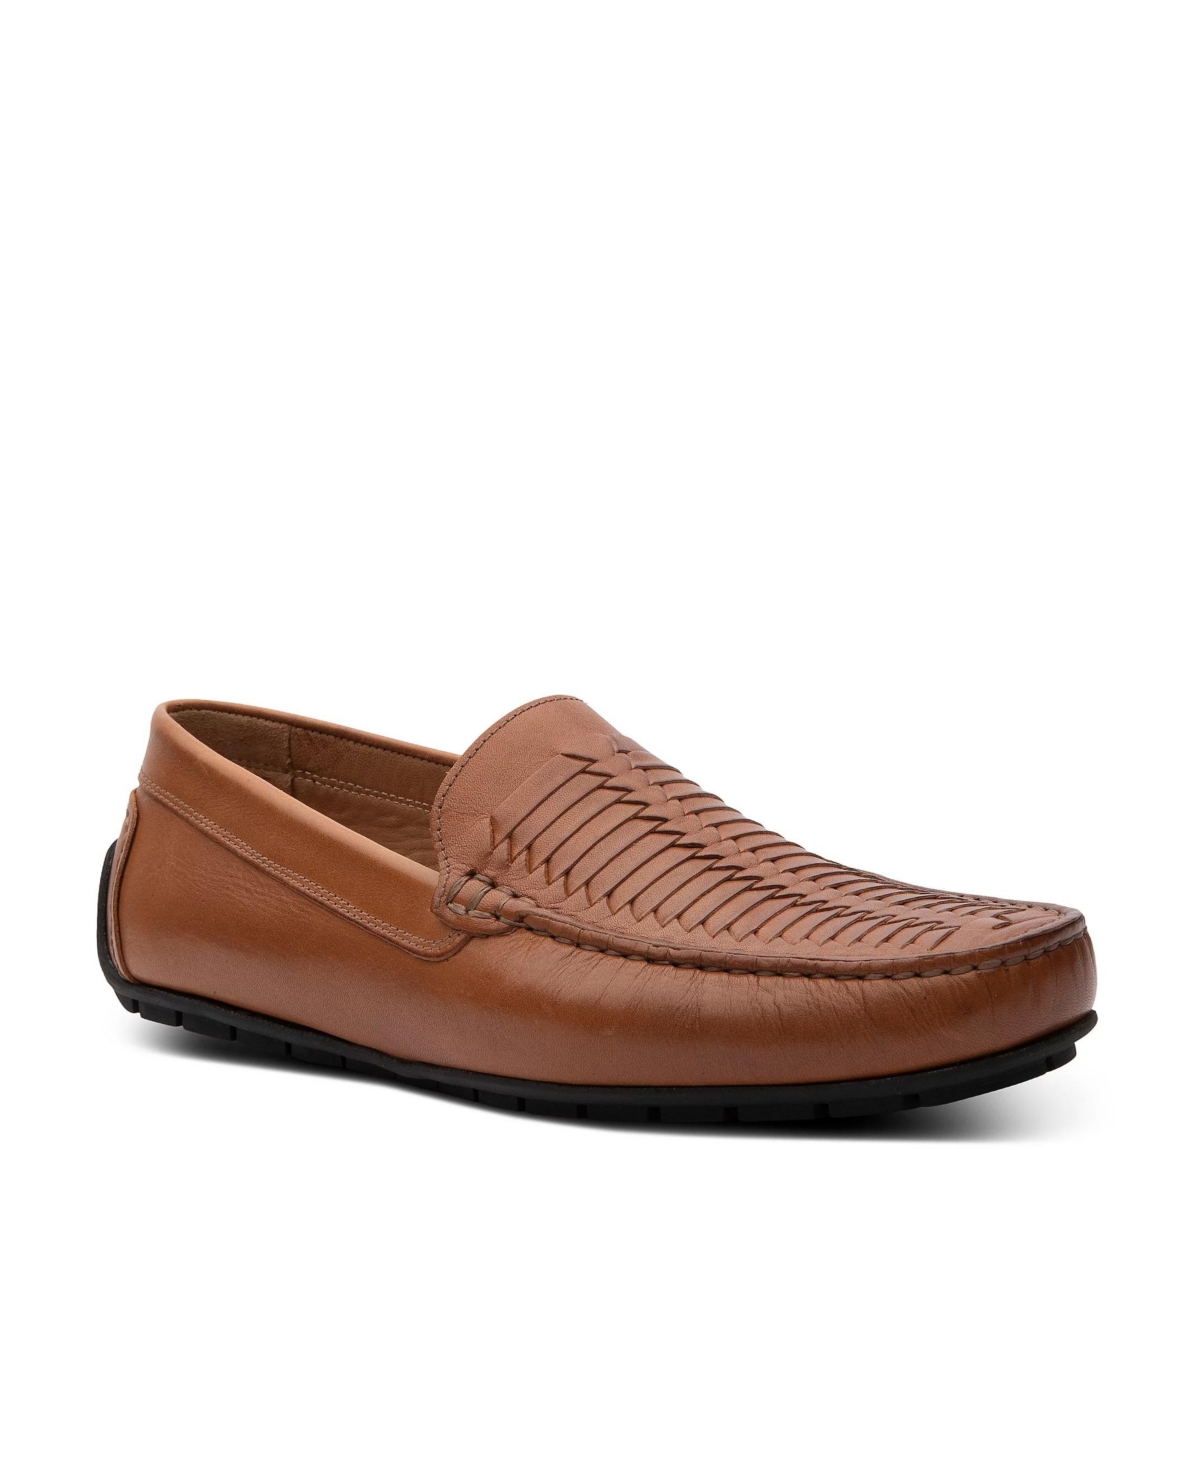 Men's Tucson Woven Slip-On Driving Moccasin Loafer Shoes - Tan